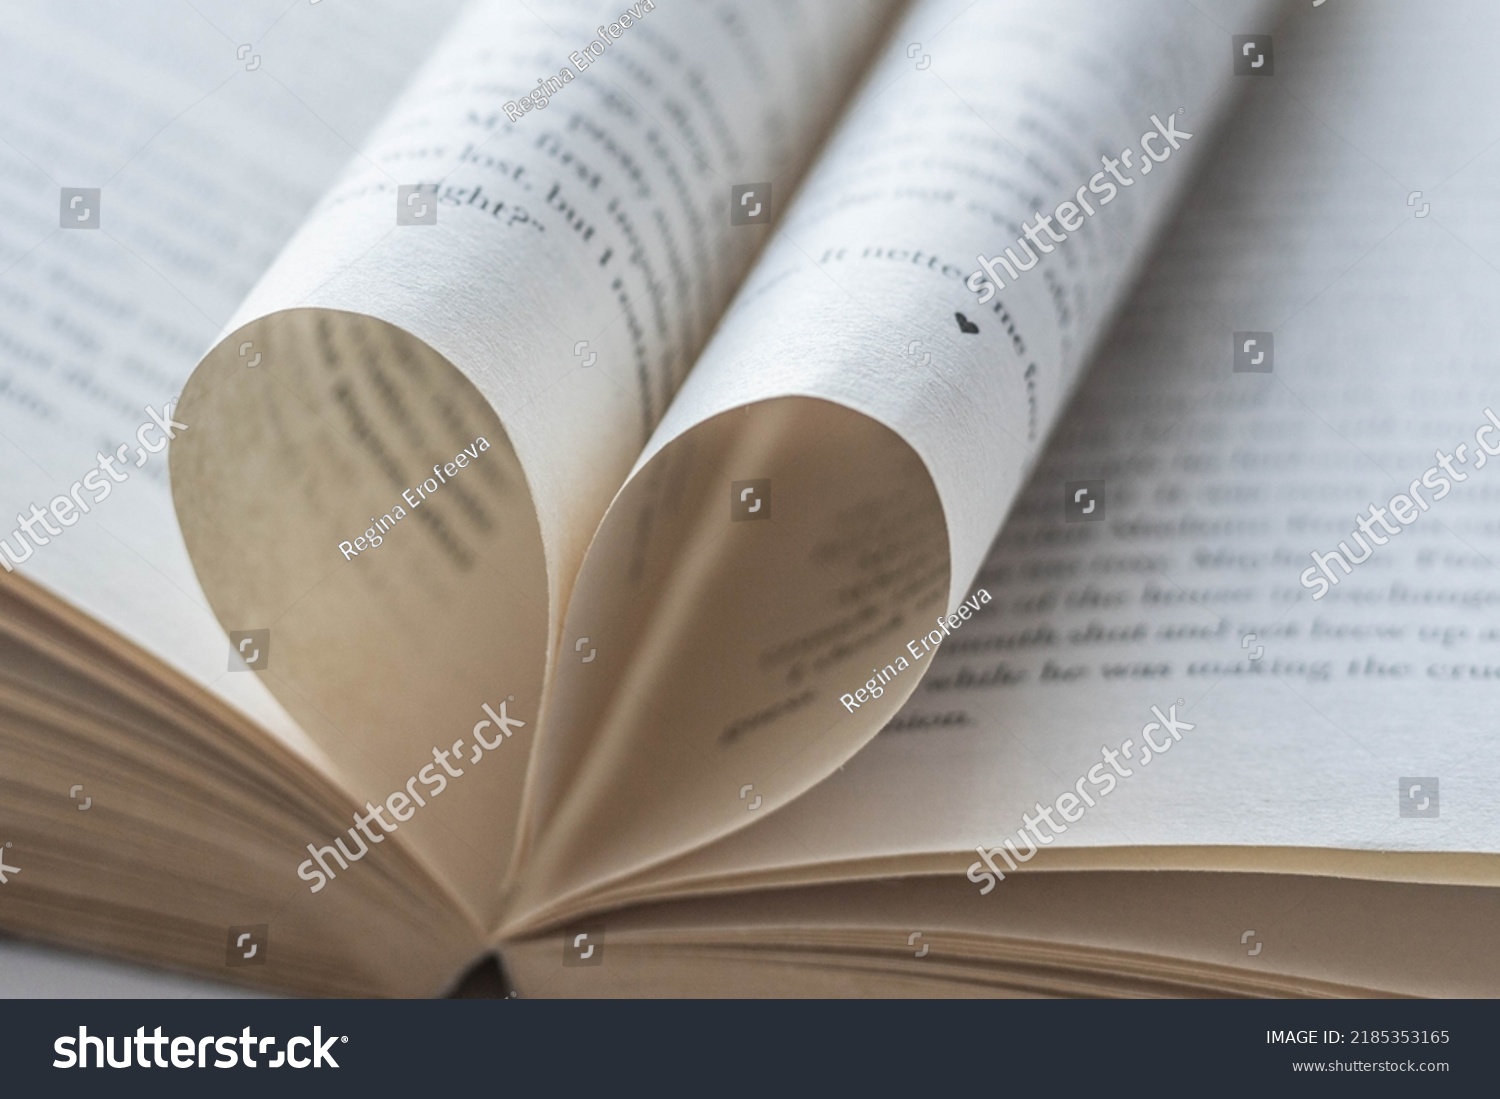 Love of books, reading. An open book with folded pages of books in the shape of a heart. Knowledge Day, Teacher's Day. Library. Reading books. #2185353165